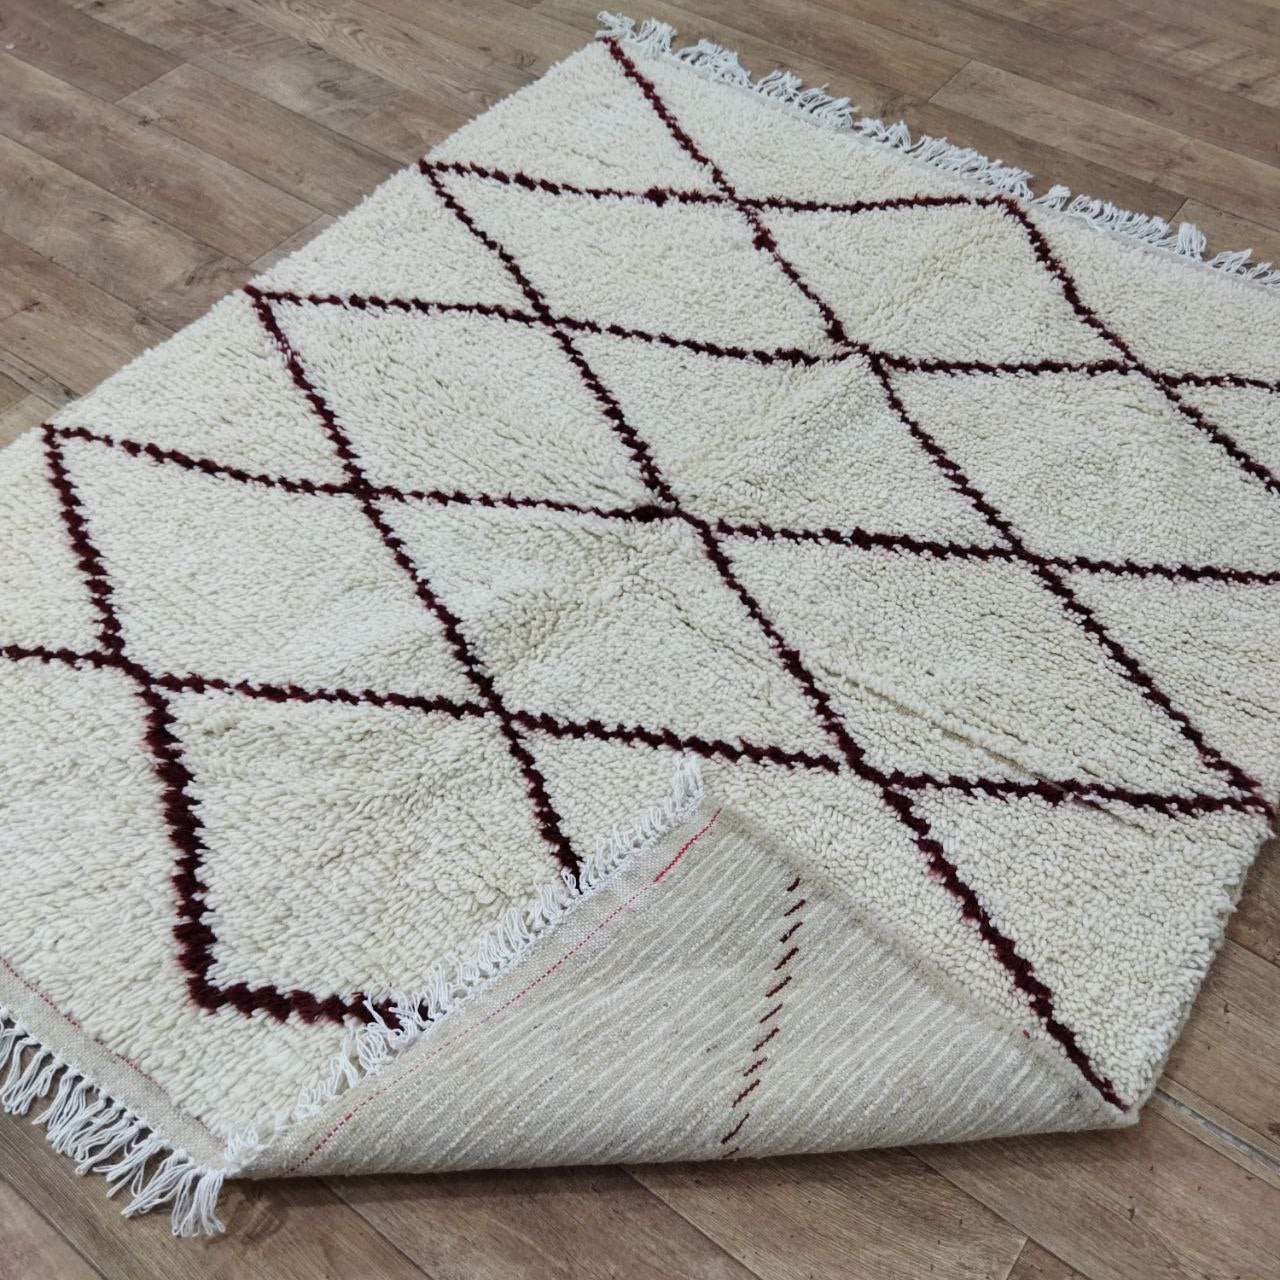 Authentic White And Burgundy Moroccan Rug - Beni Ourain Rug 5x5 Ft